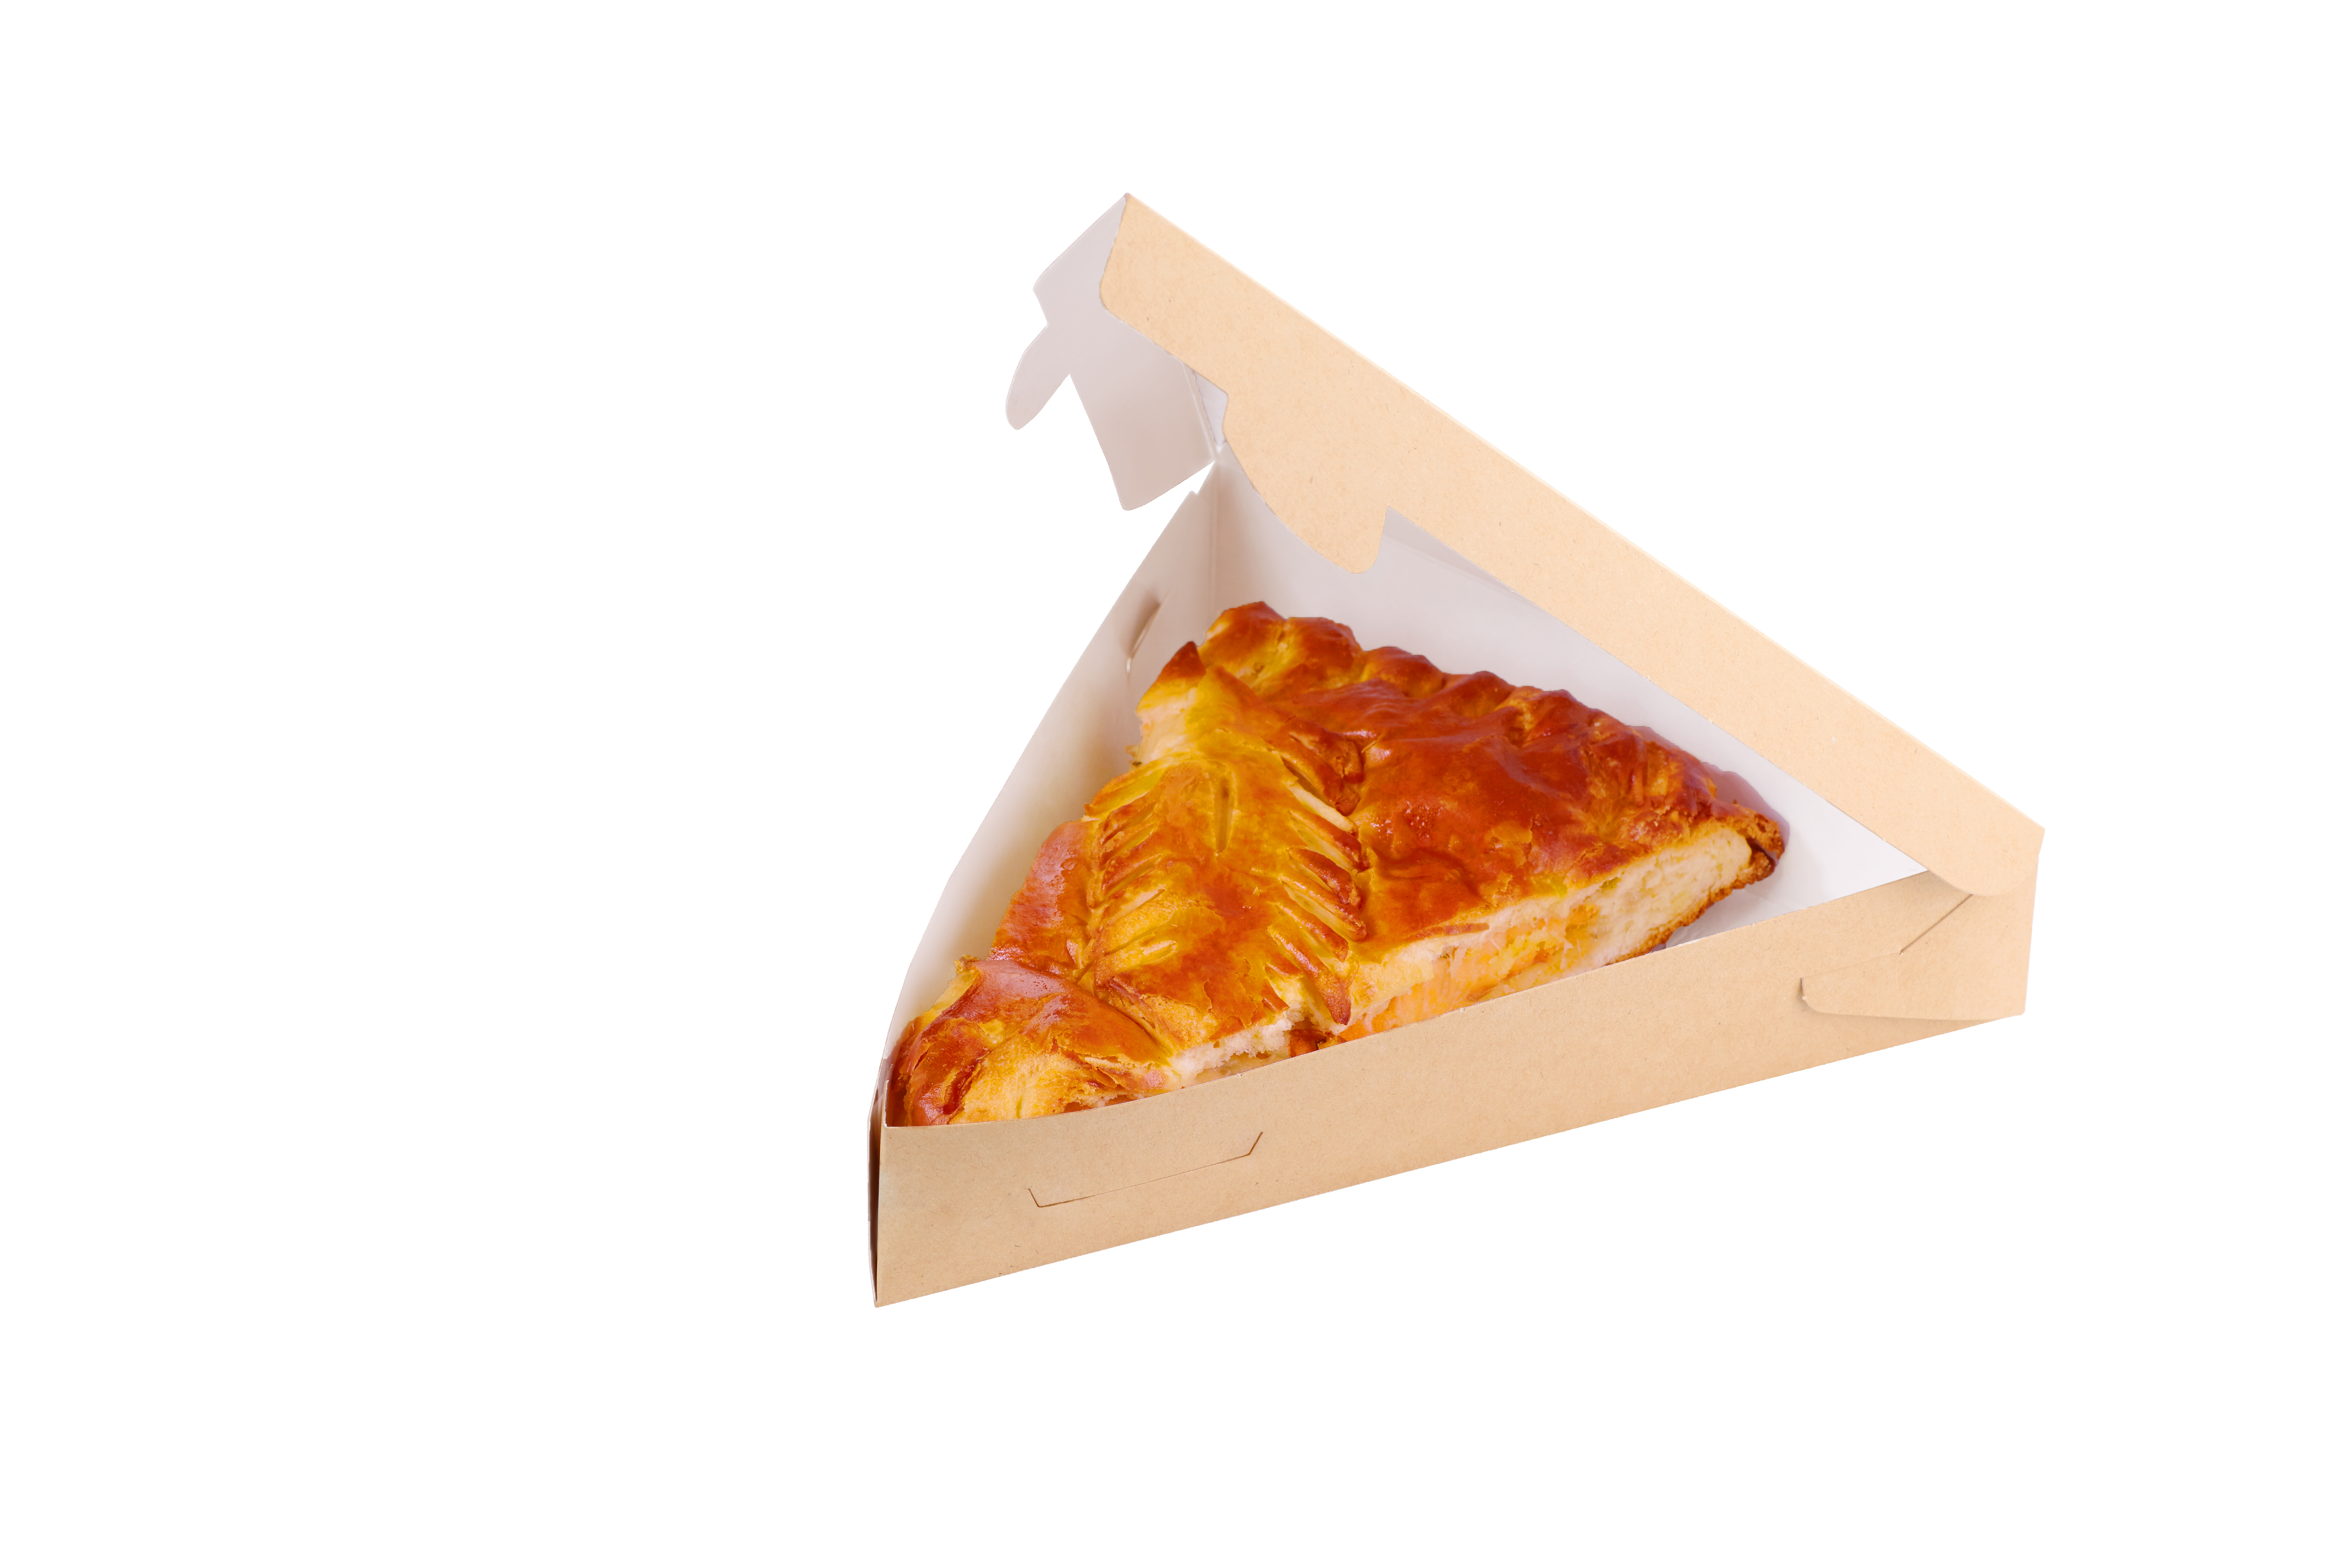 OSQ PIE packaging for pies, pizzas